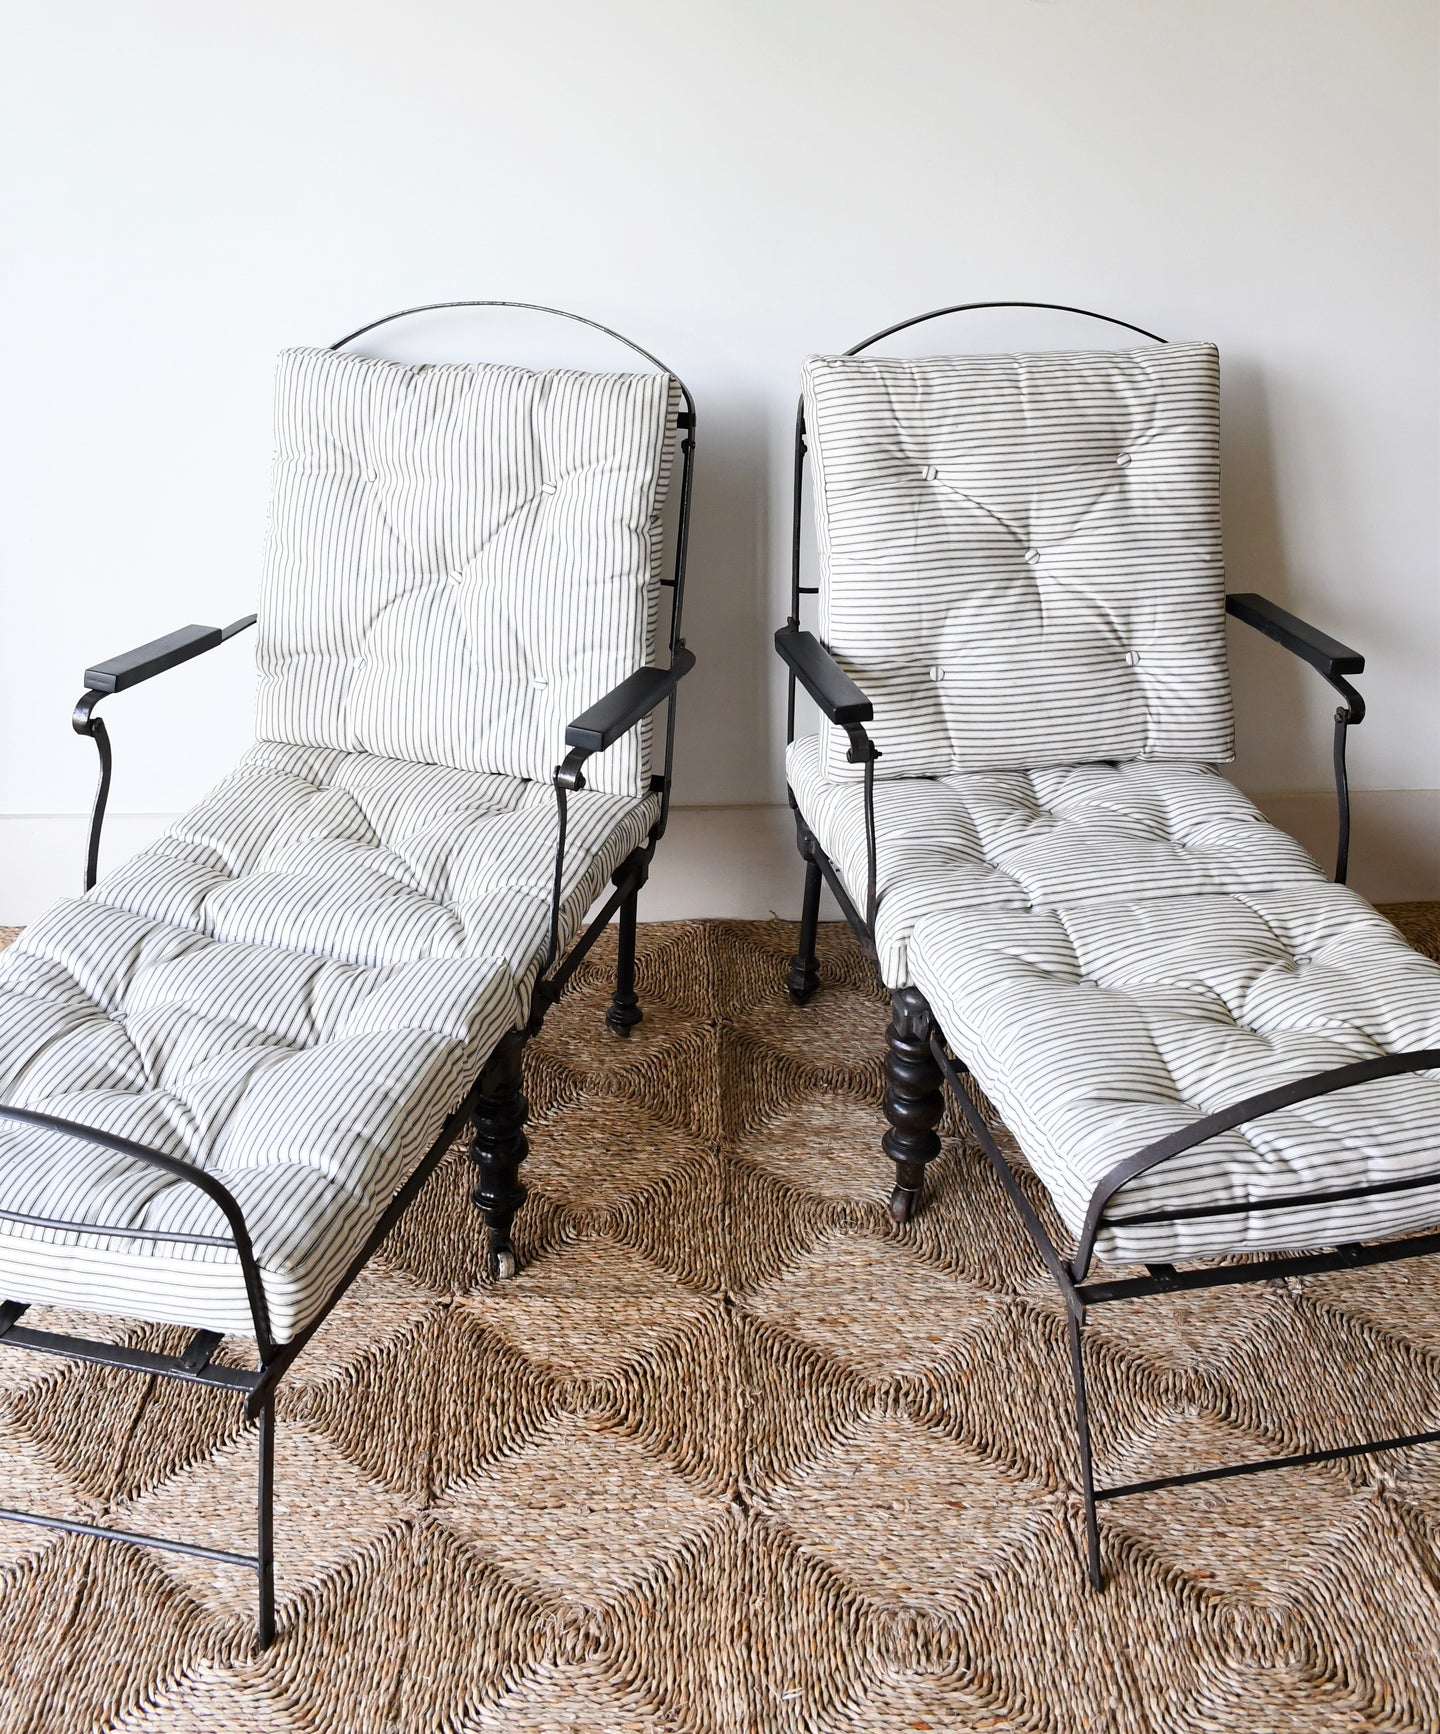 A Pair of 19th Century - Folding Campaign Chairs/Daybeds